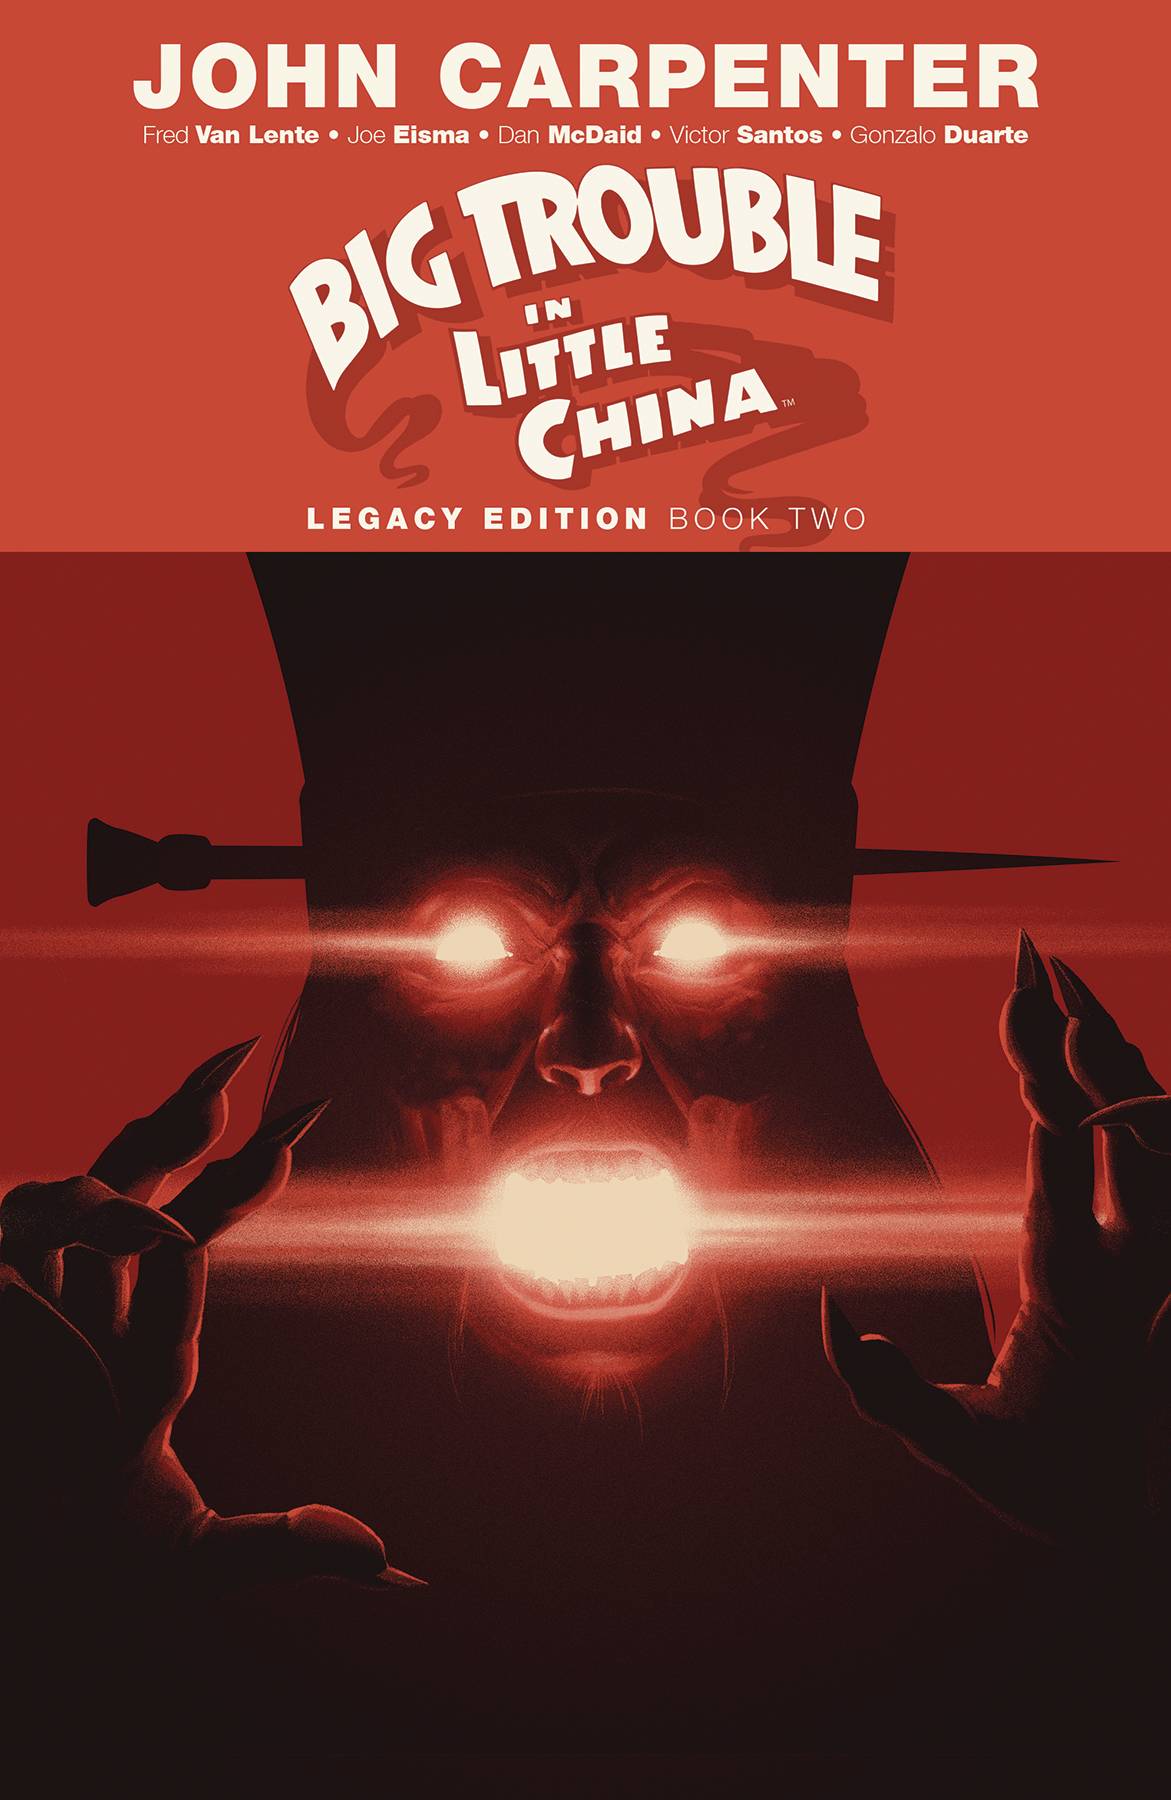 Big Trouble in Little China Legacy Edition Graphic Novel Volume 2